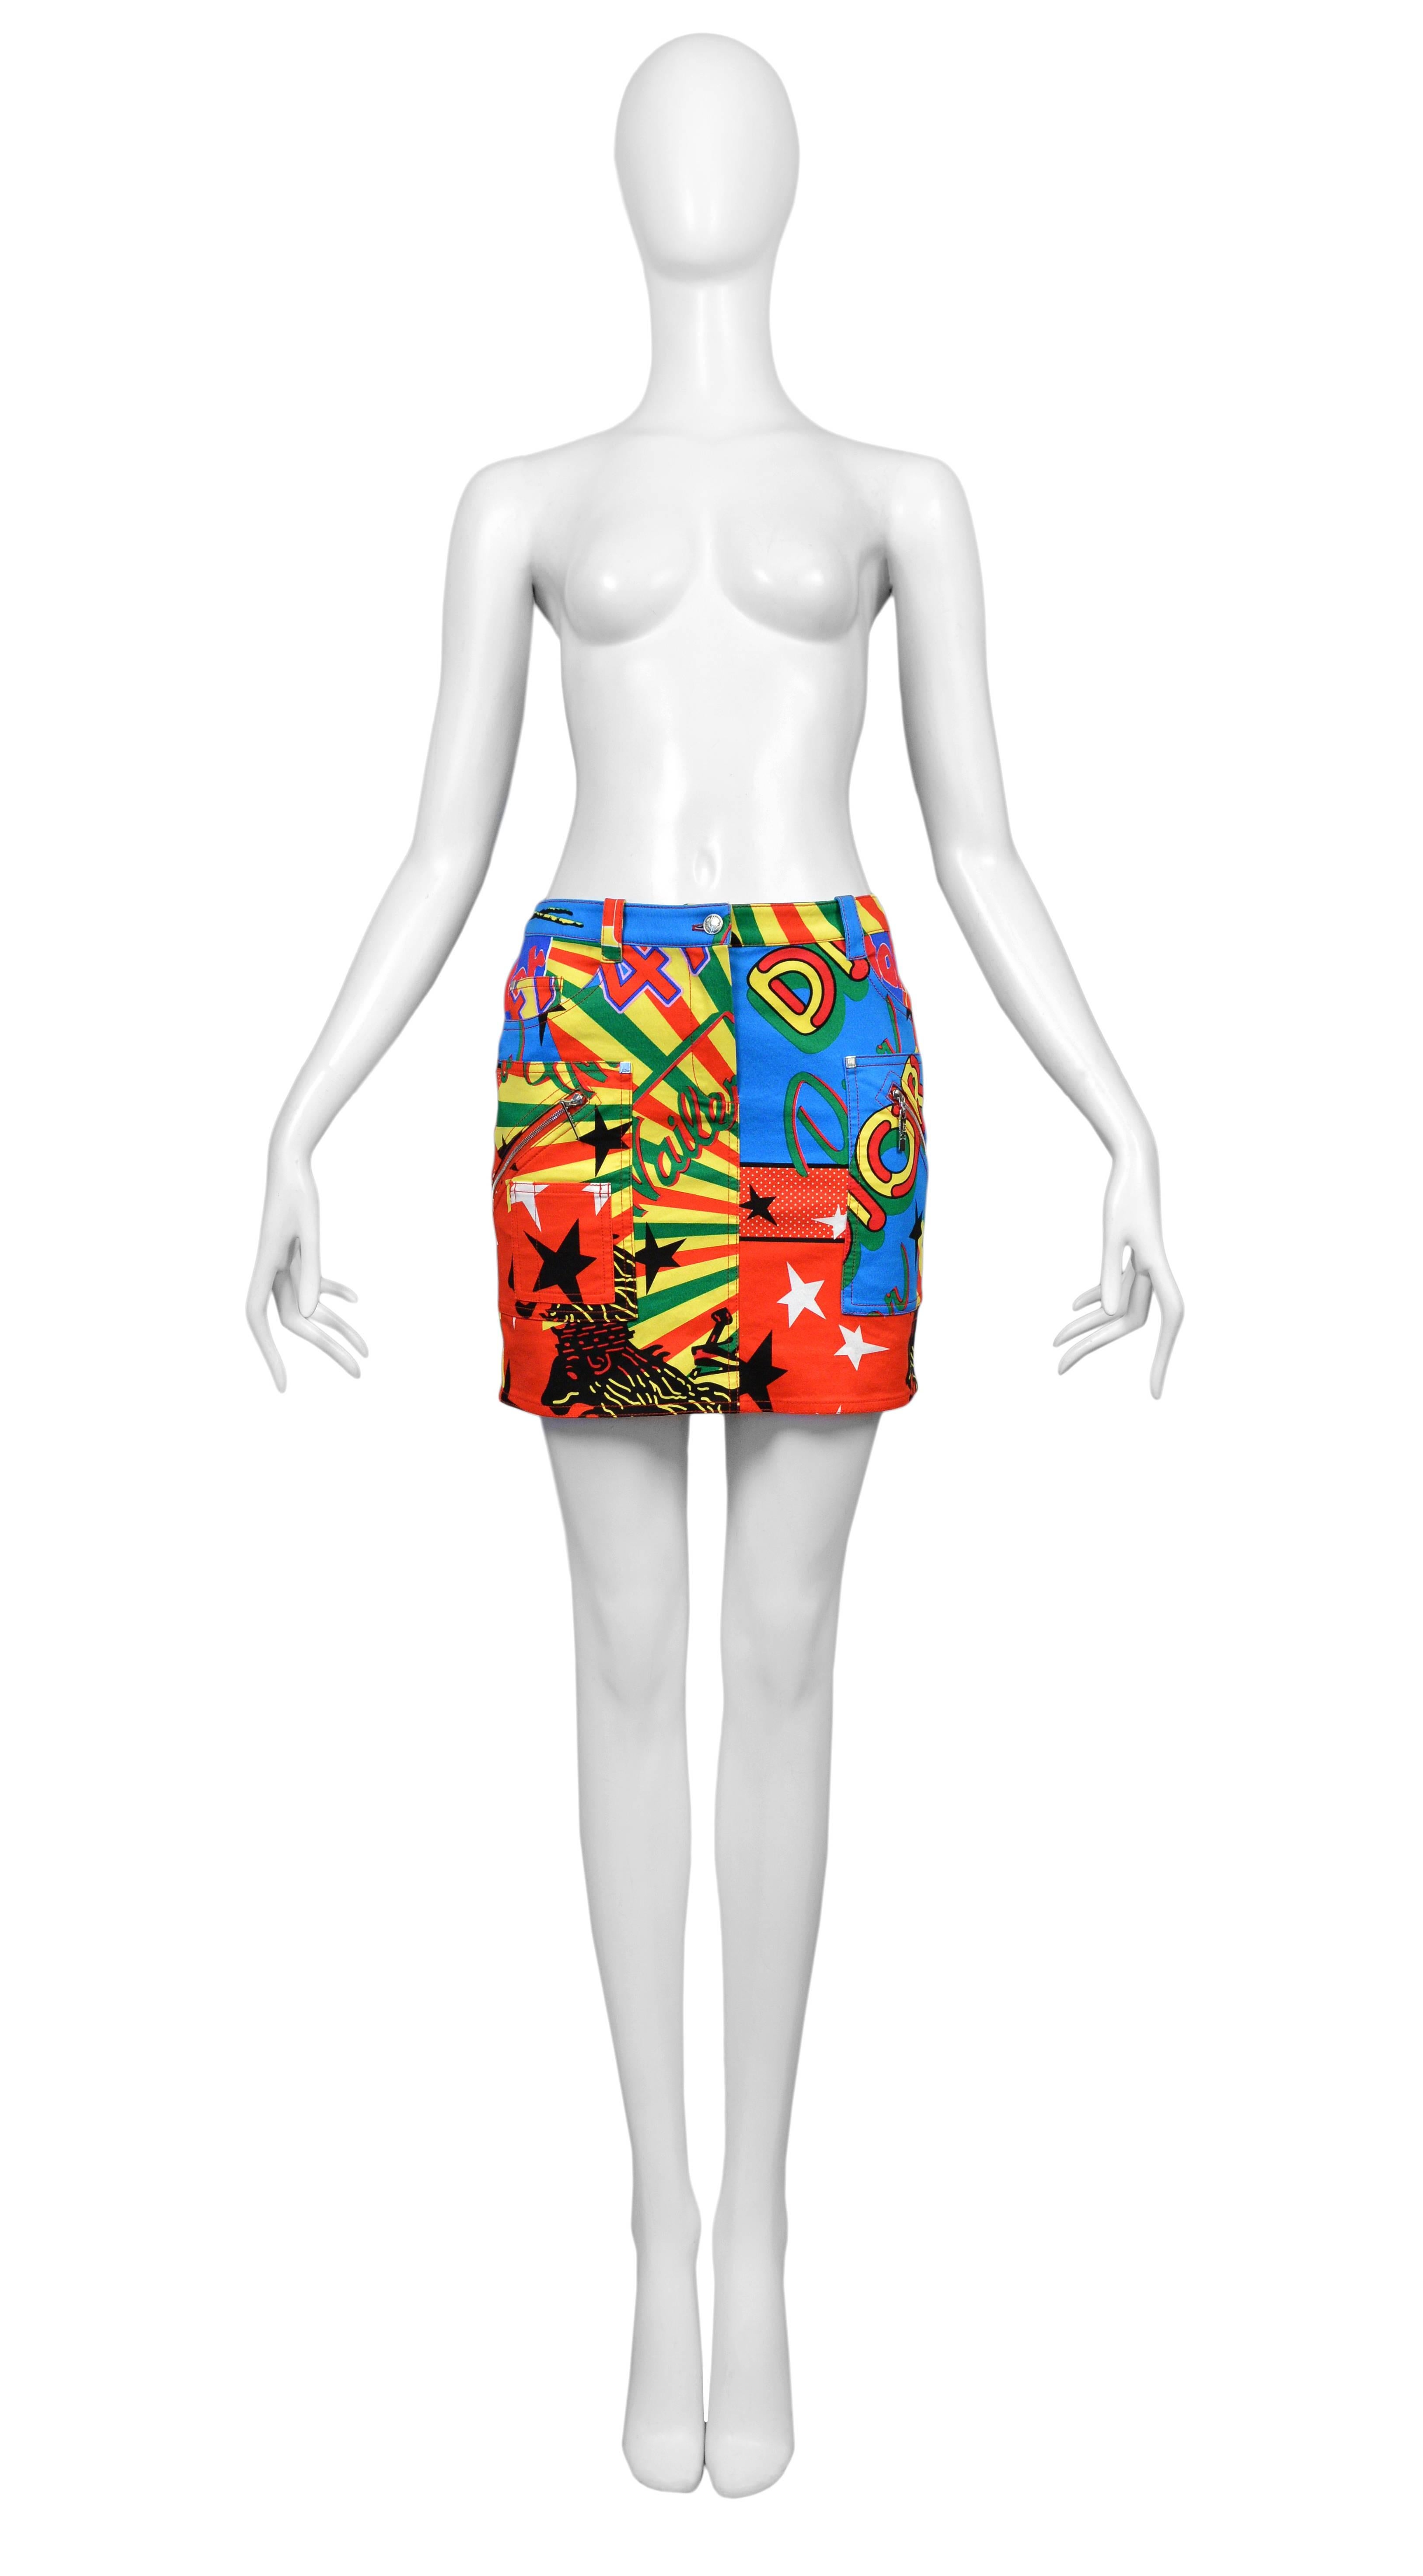 CHRISTIAN DIOR
ICONIC REGGAE GRAPHIC SKIRT
Condition : Excellent Vintage Condition
Christian Dior by John Galliano mini skirt with multicolor 